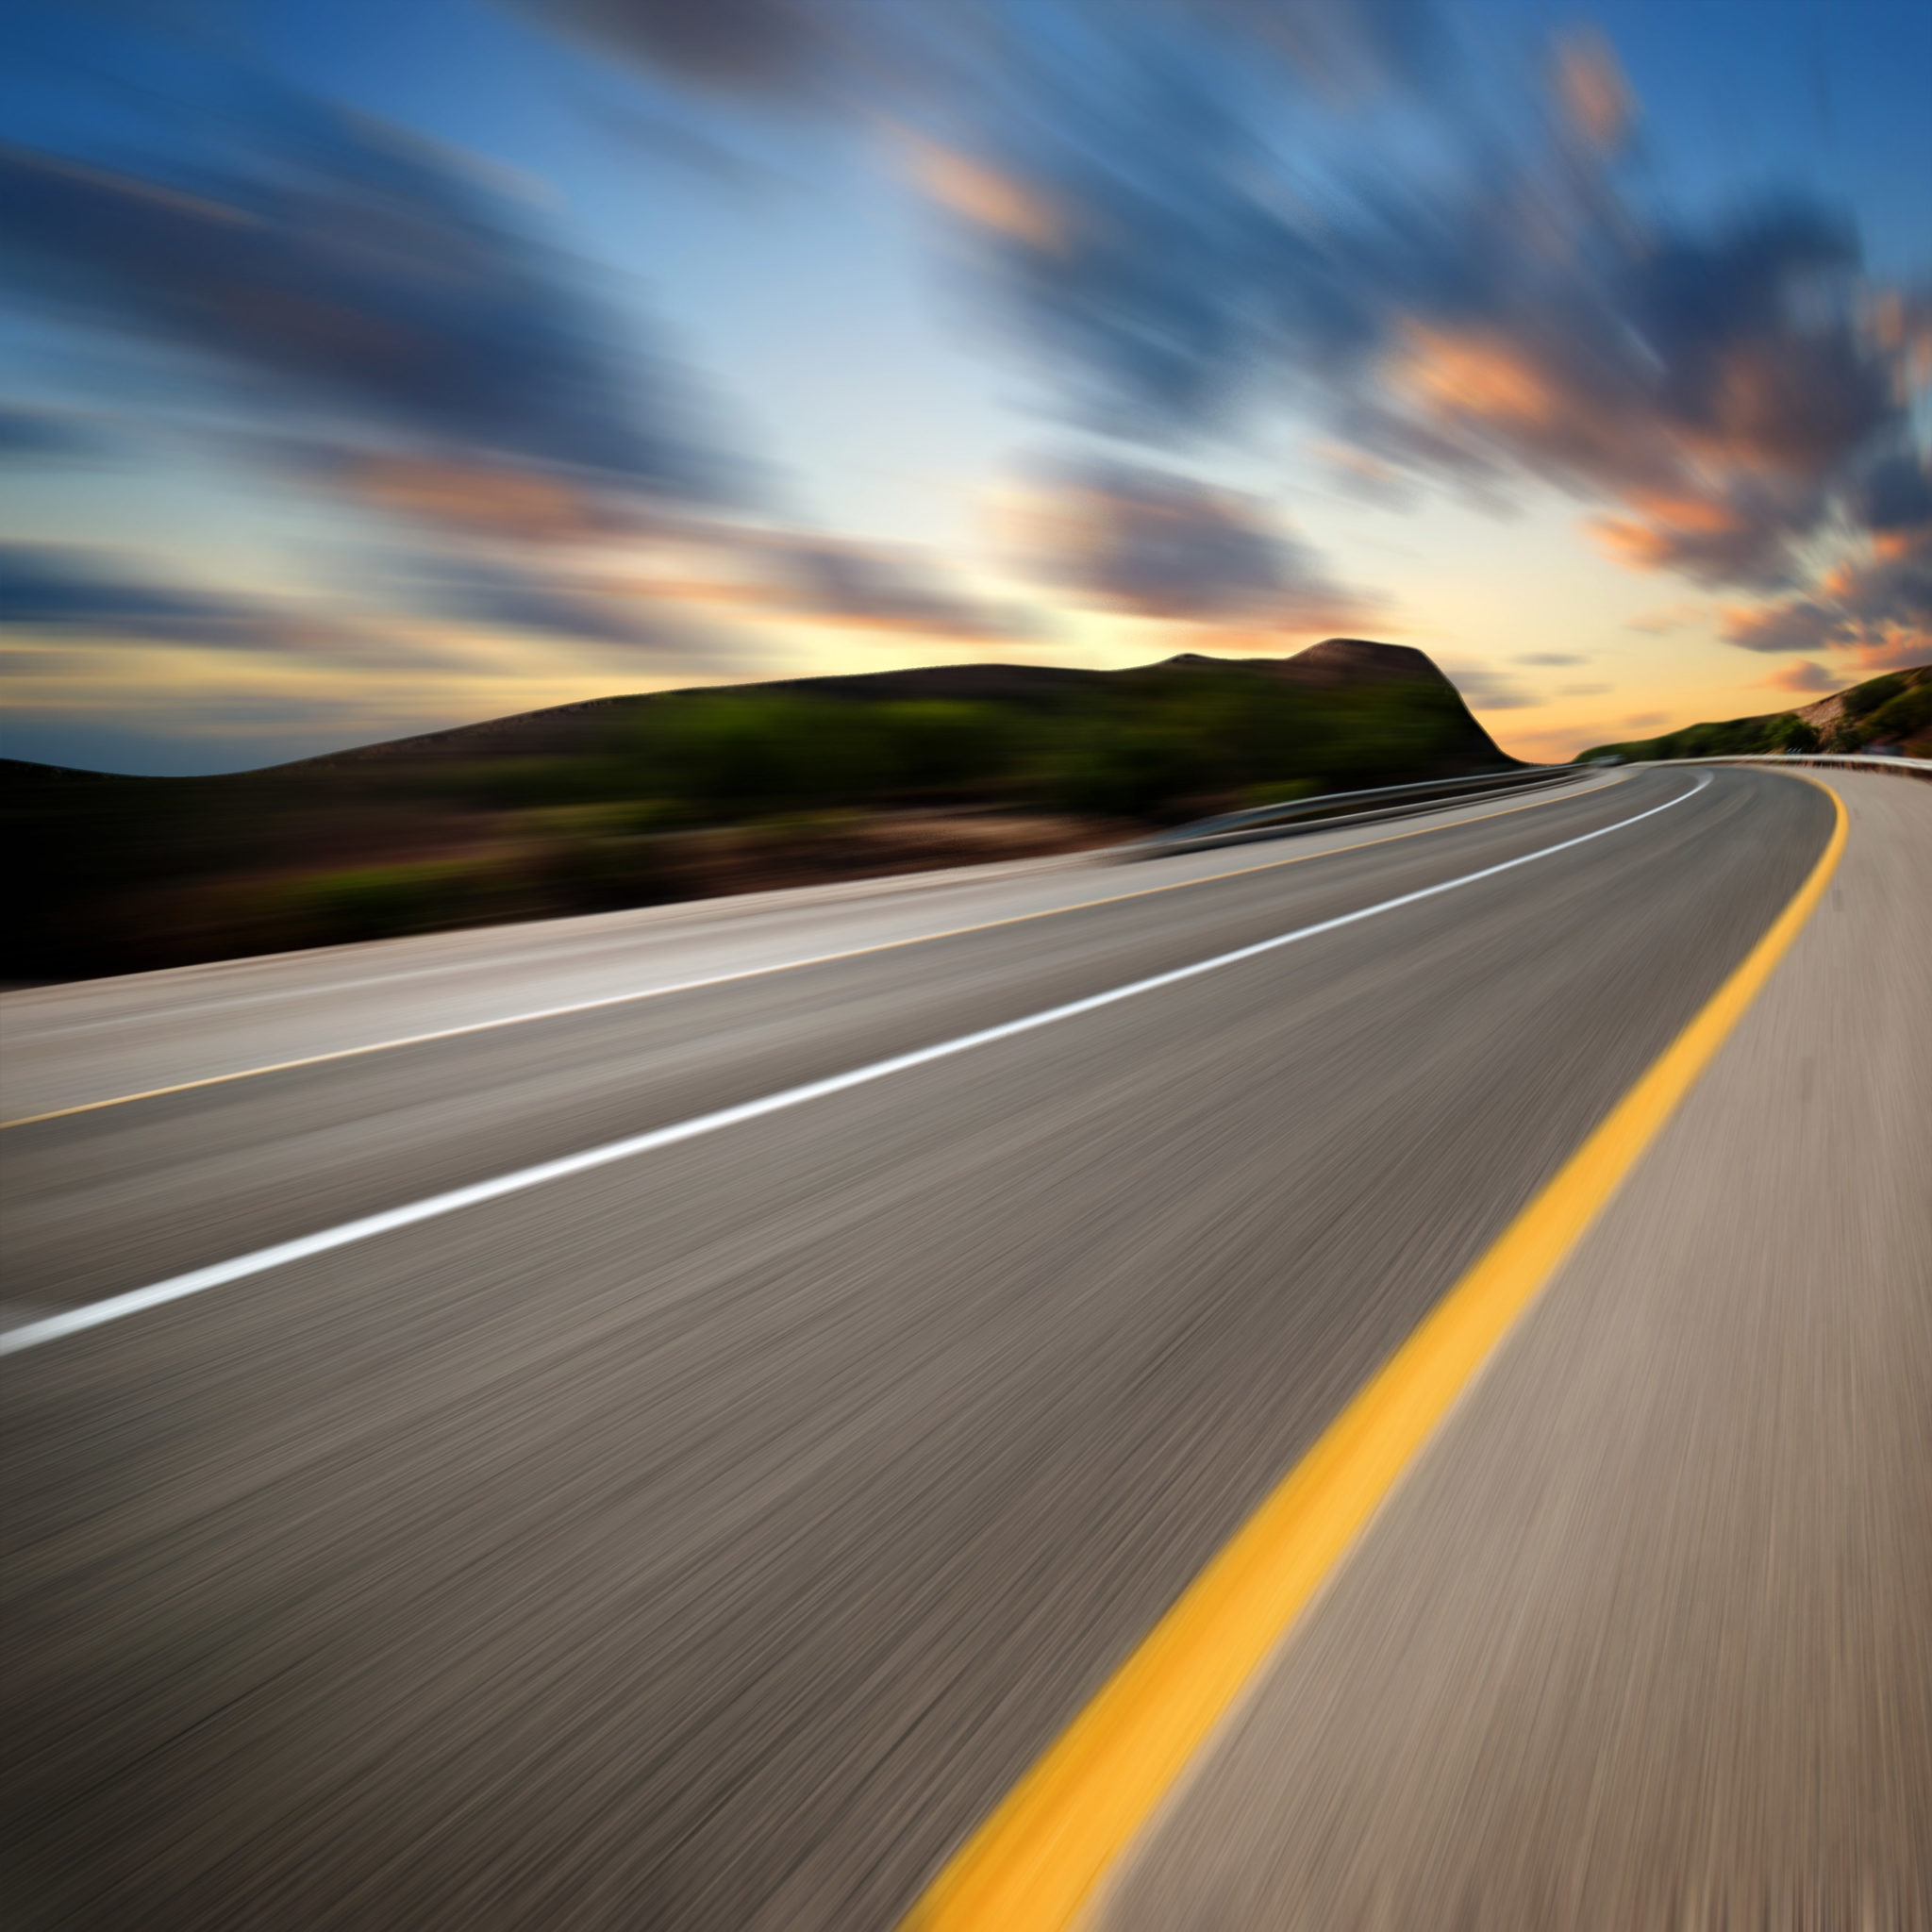 Road Amazing Photo Background – HD Wallpapers Backgrounds Desktop, iphone & Android Free Download